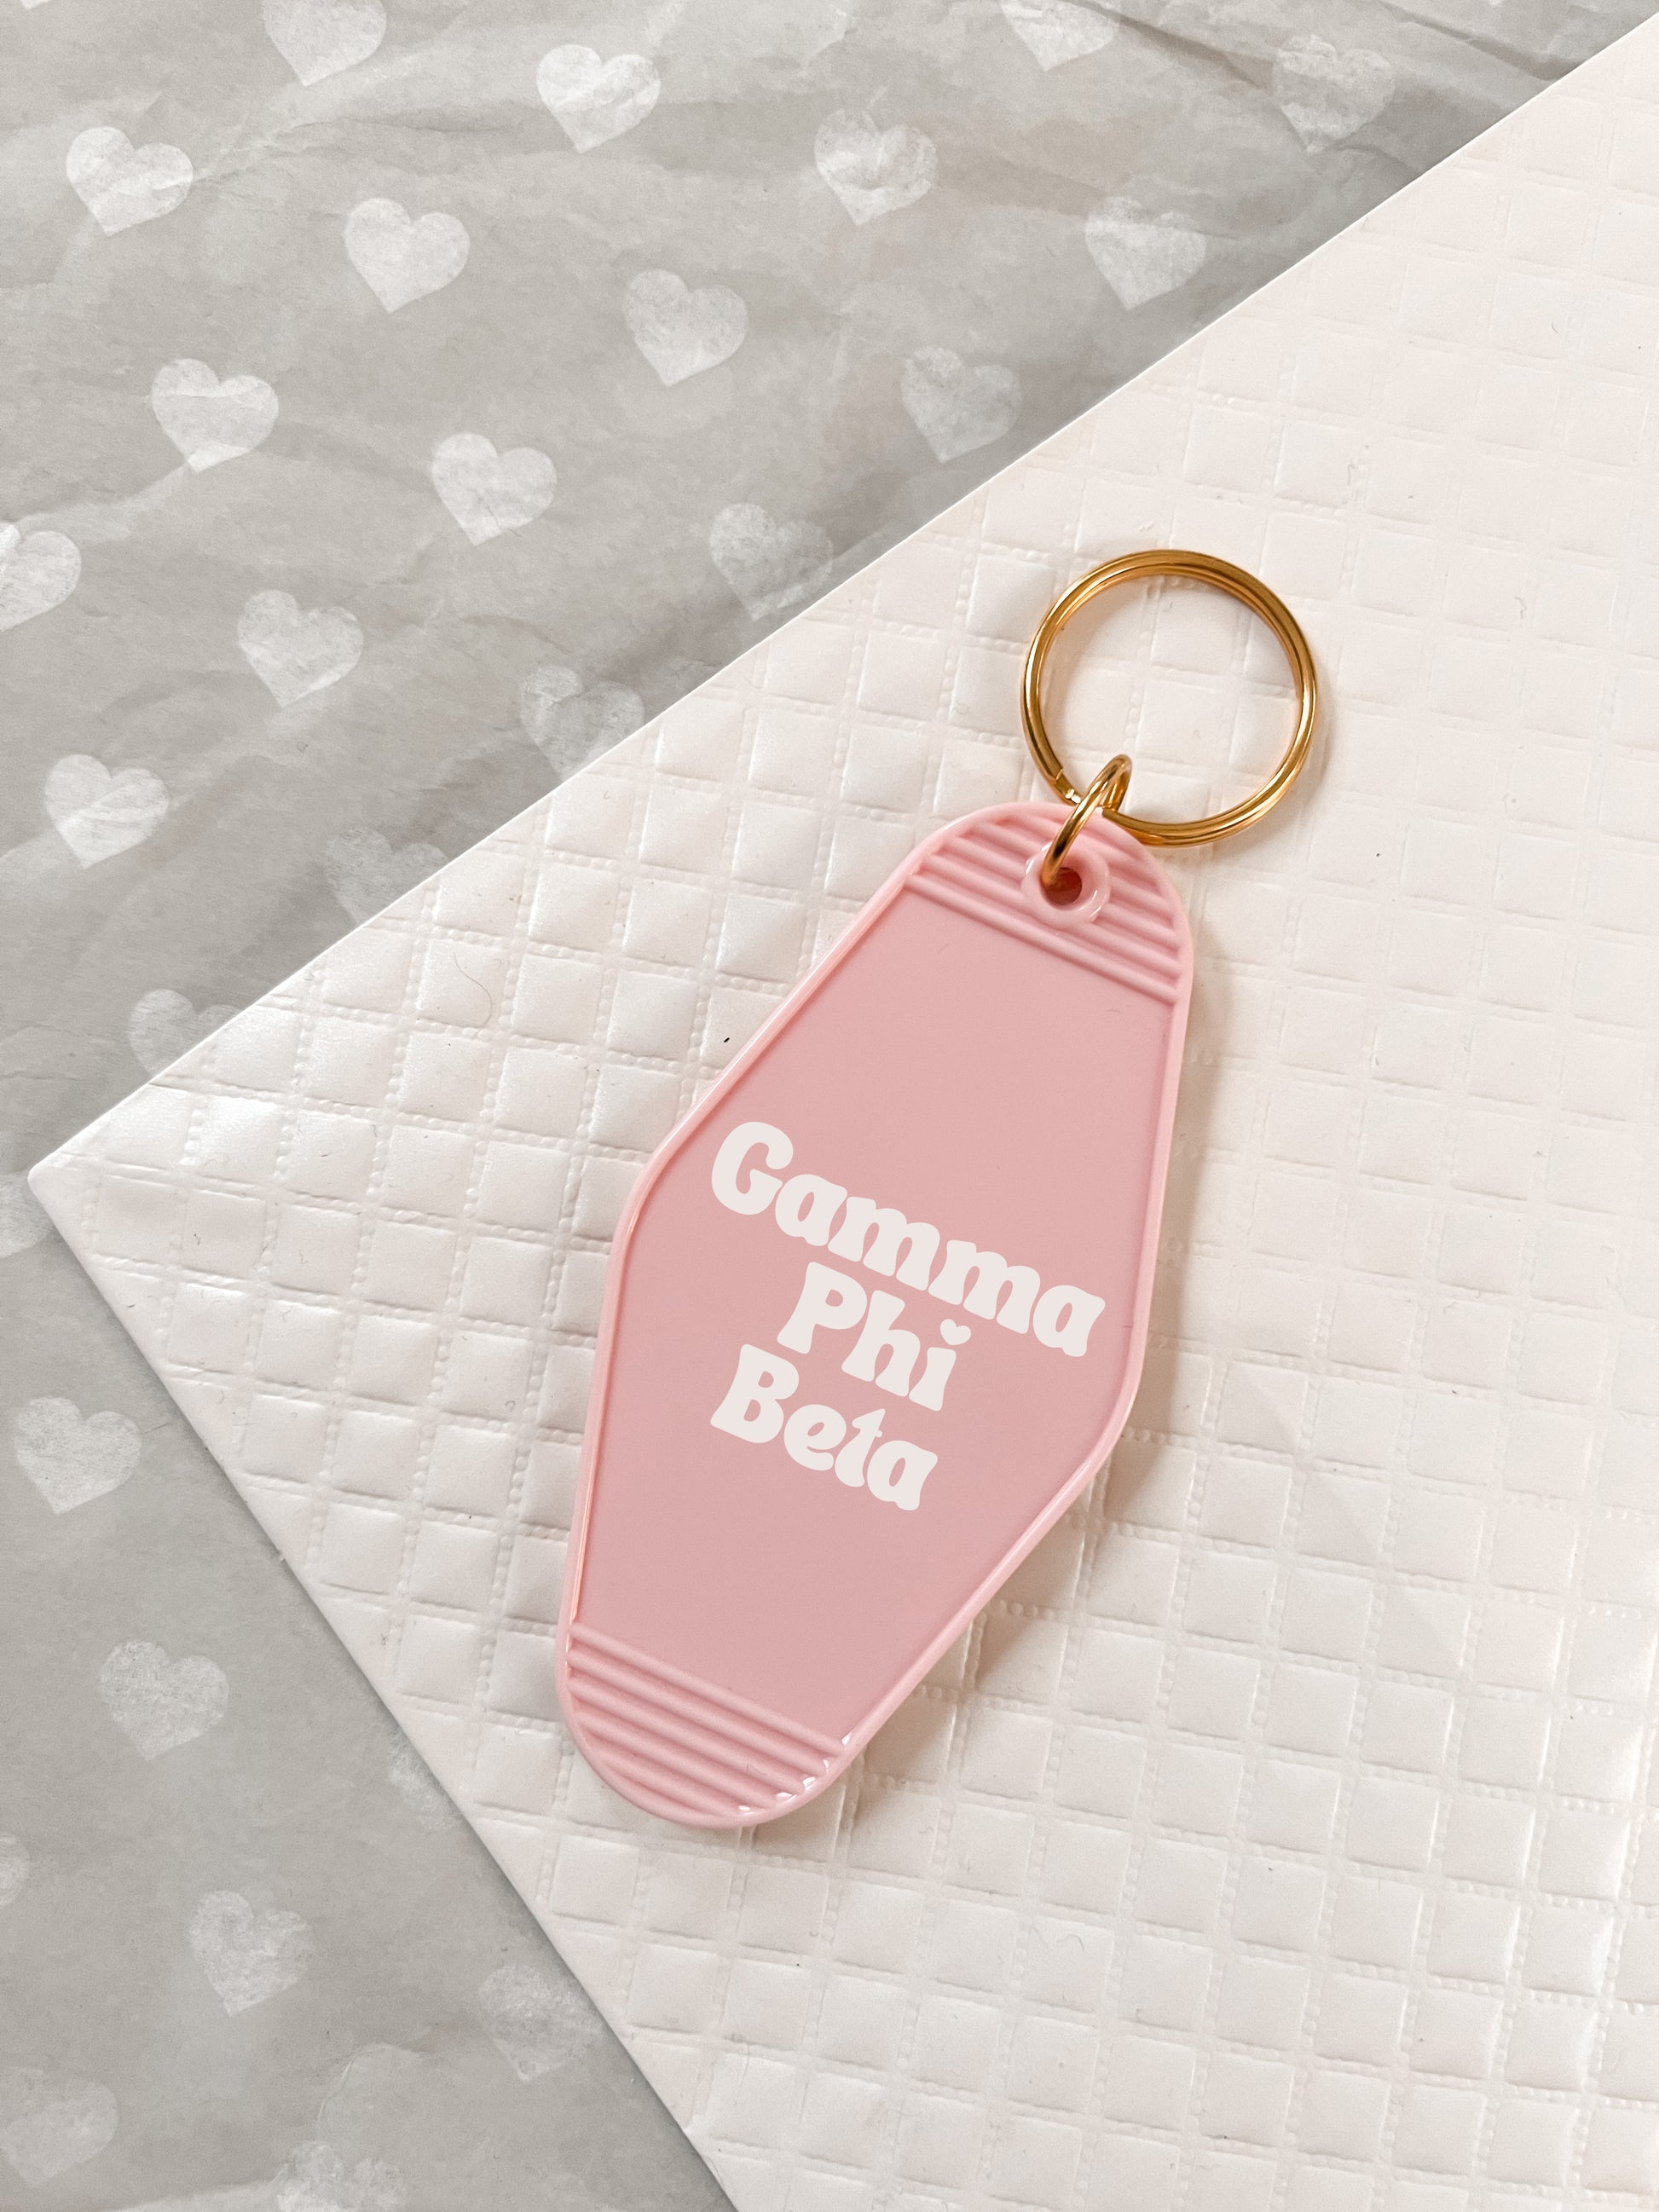 Gamma Phi Beta Motel Hotel Key Chain in Soft pink with white letters and gold ring. GPB GammaPhi GPhi GPhiB